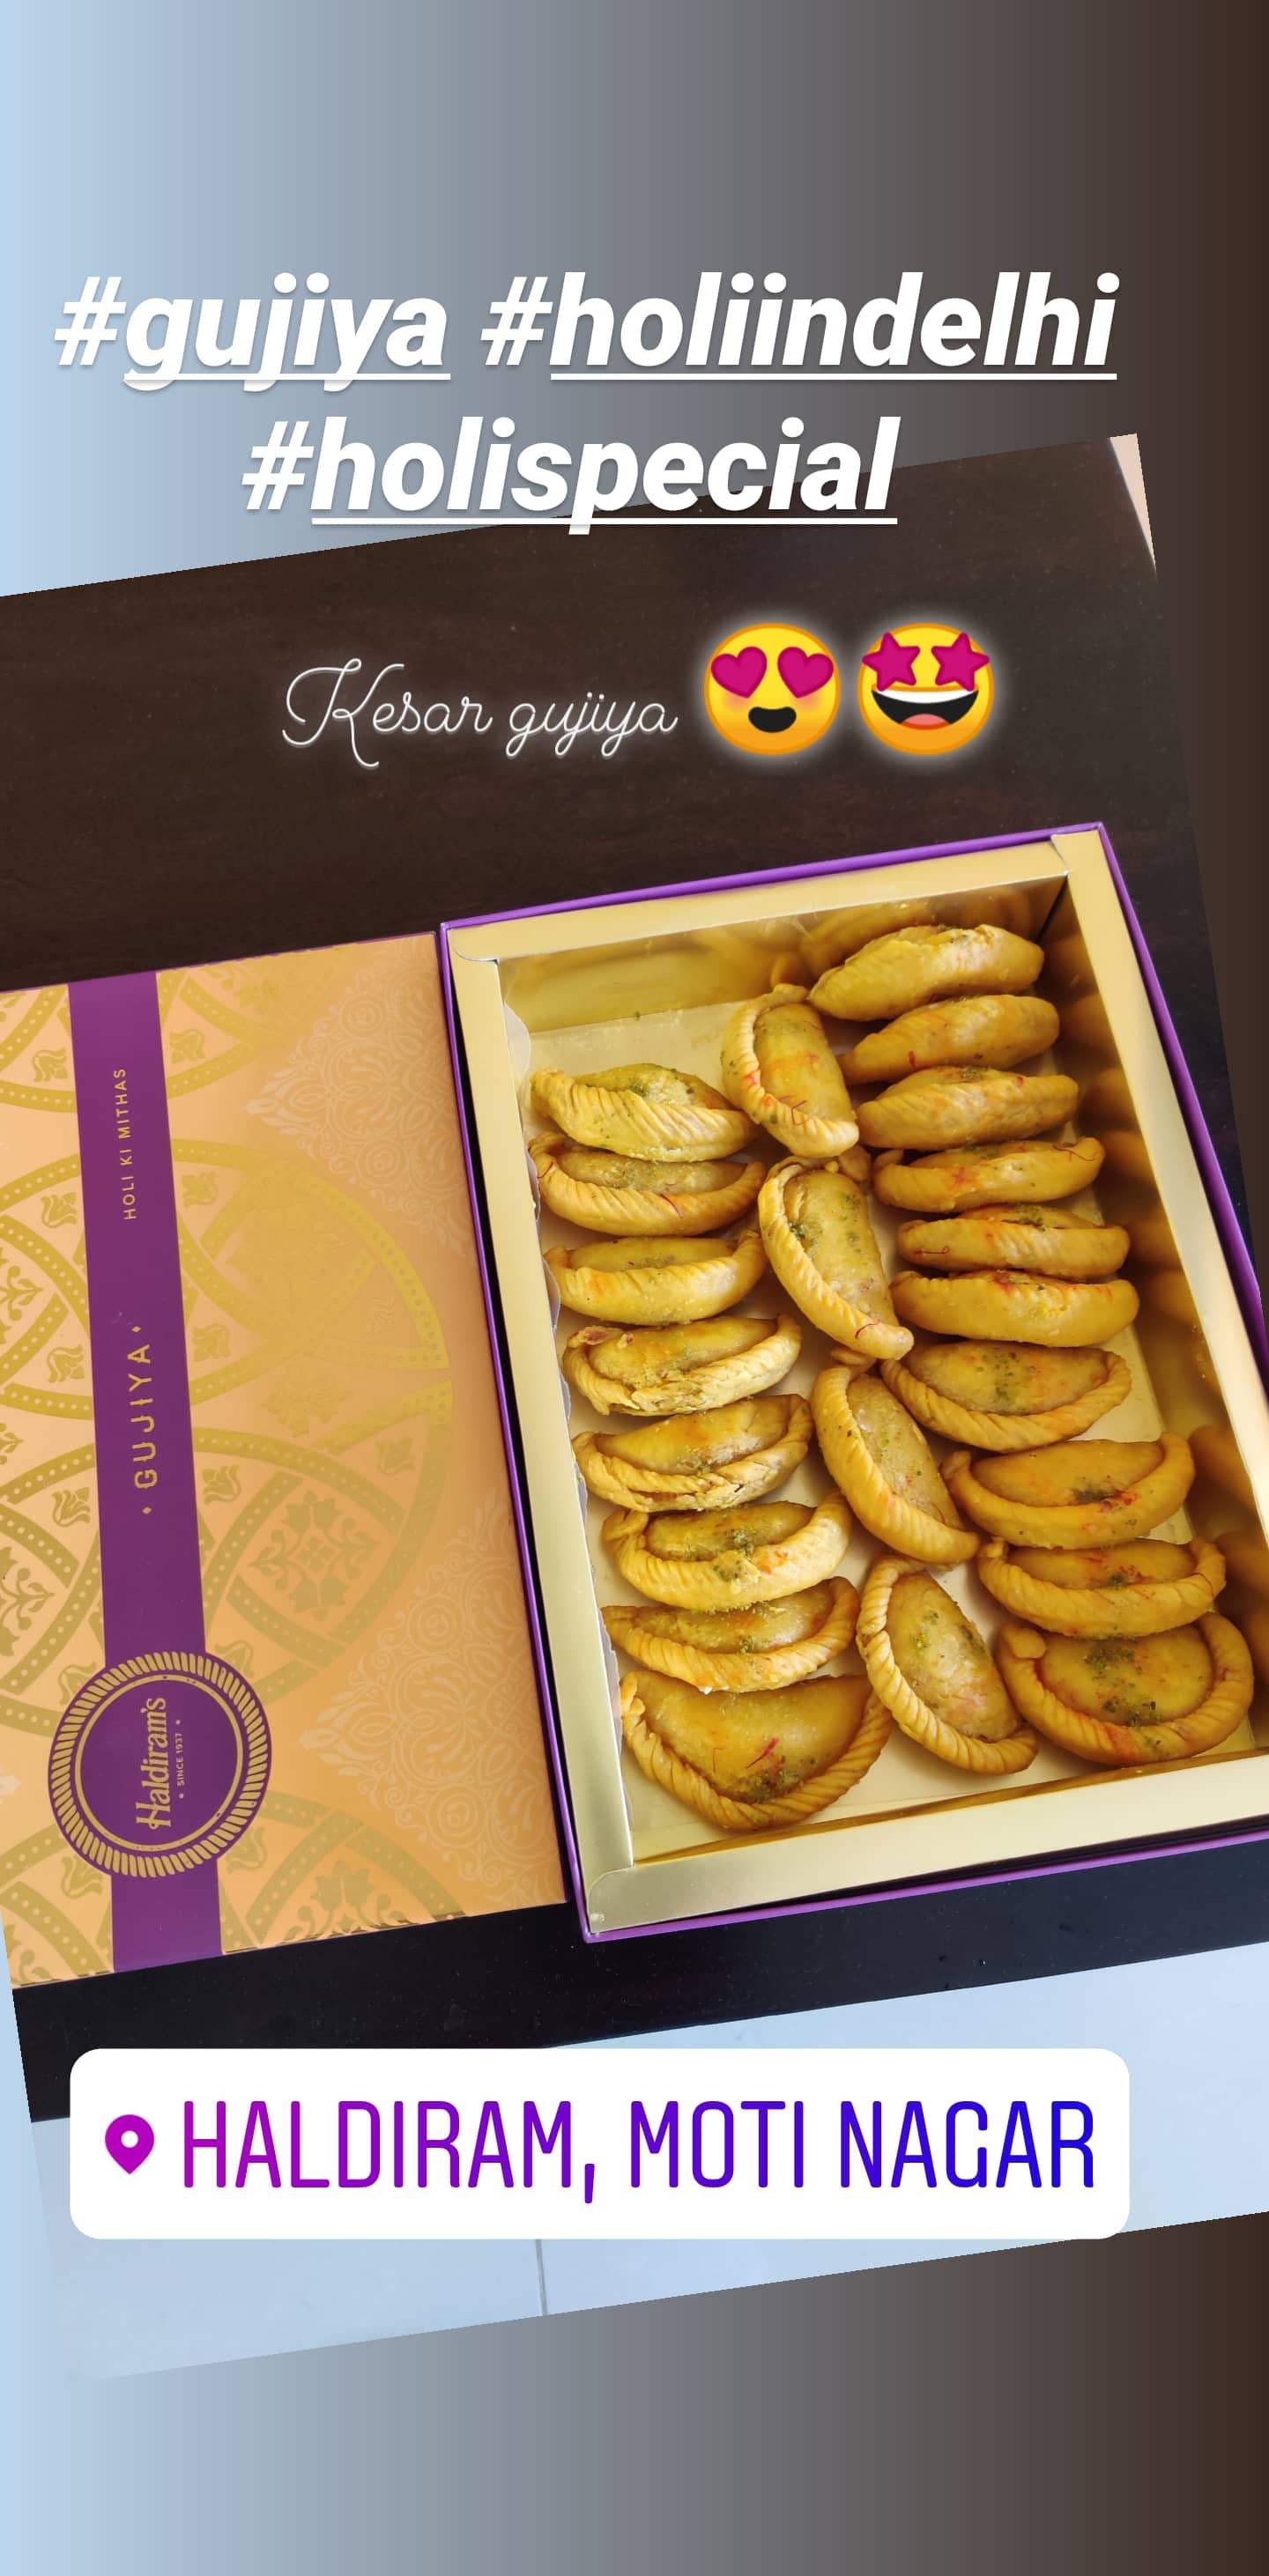 In India, Celebrations Are Incomplete Without Good Food. And Holi Is Incomplete Without "Gujiya"!